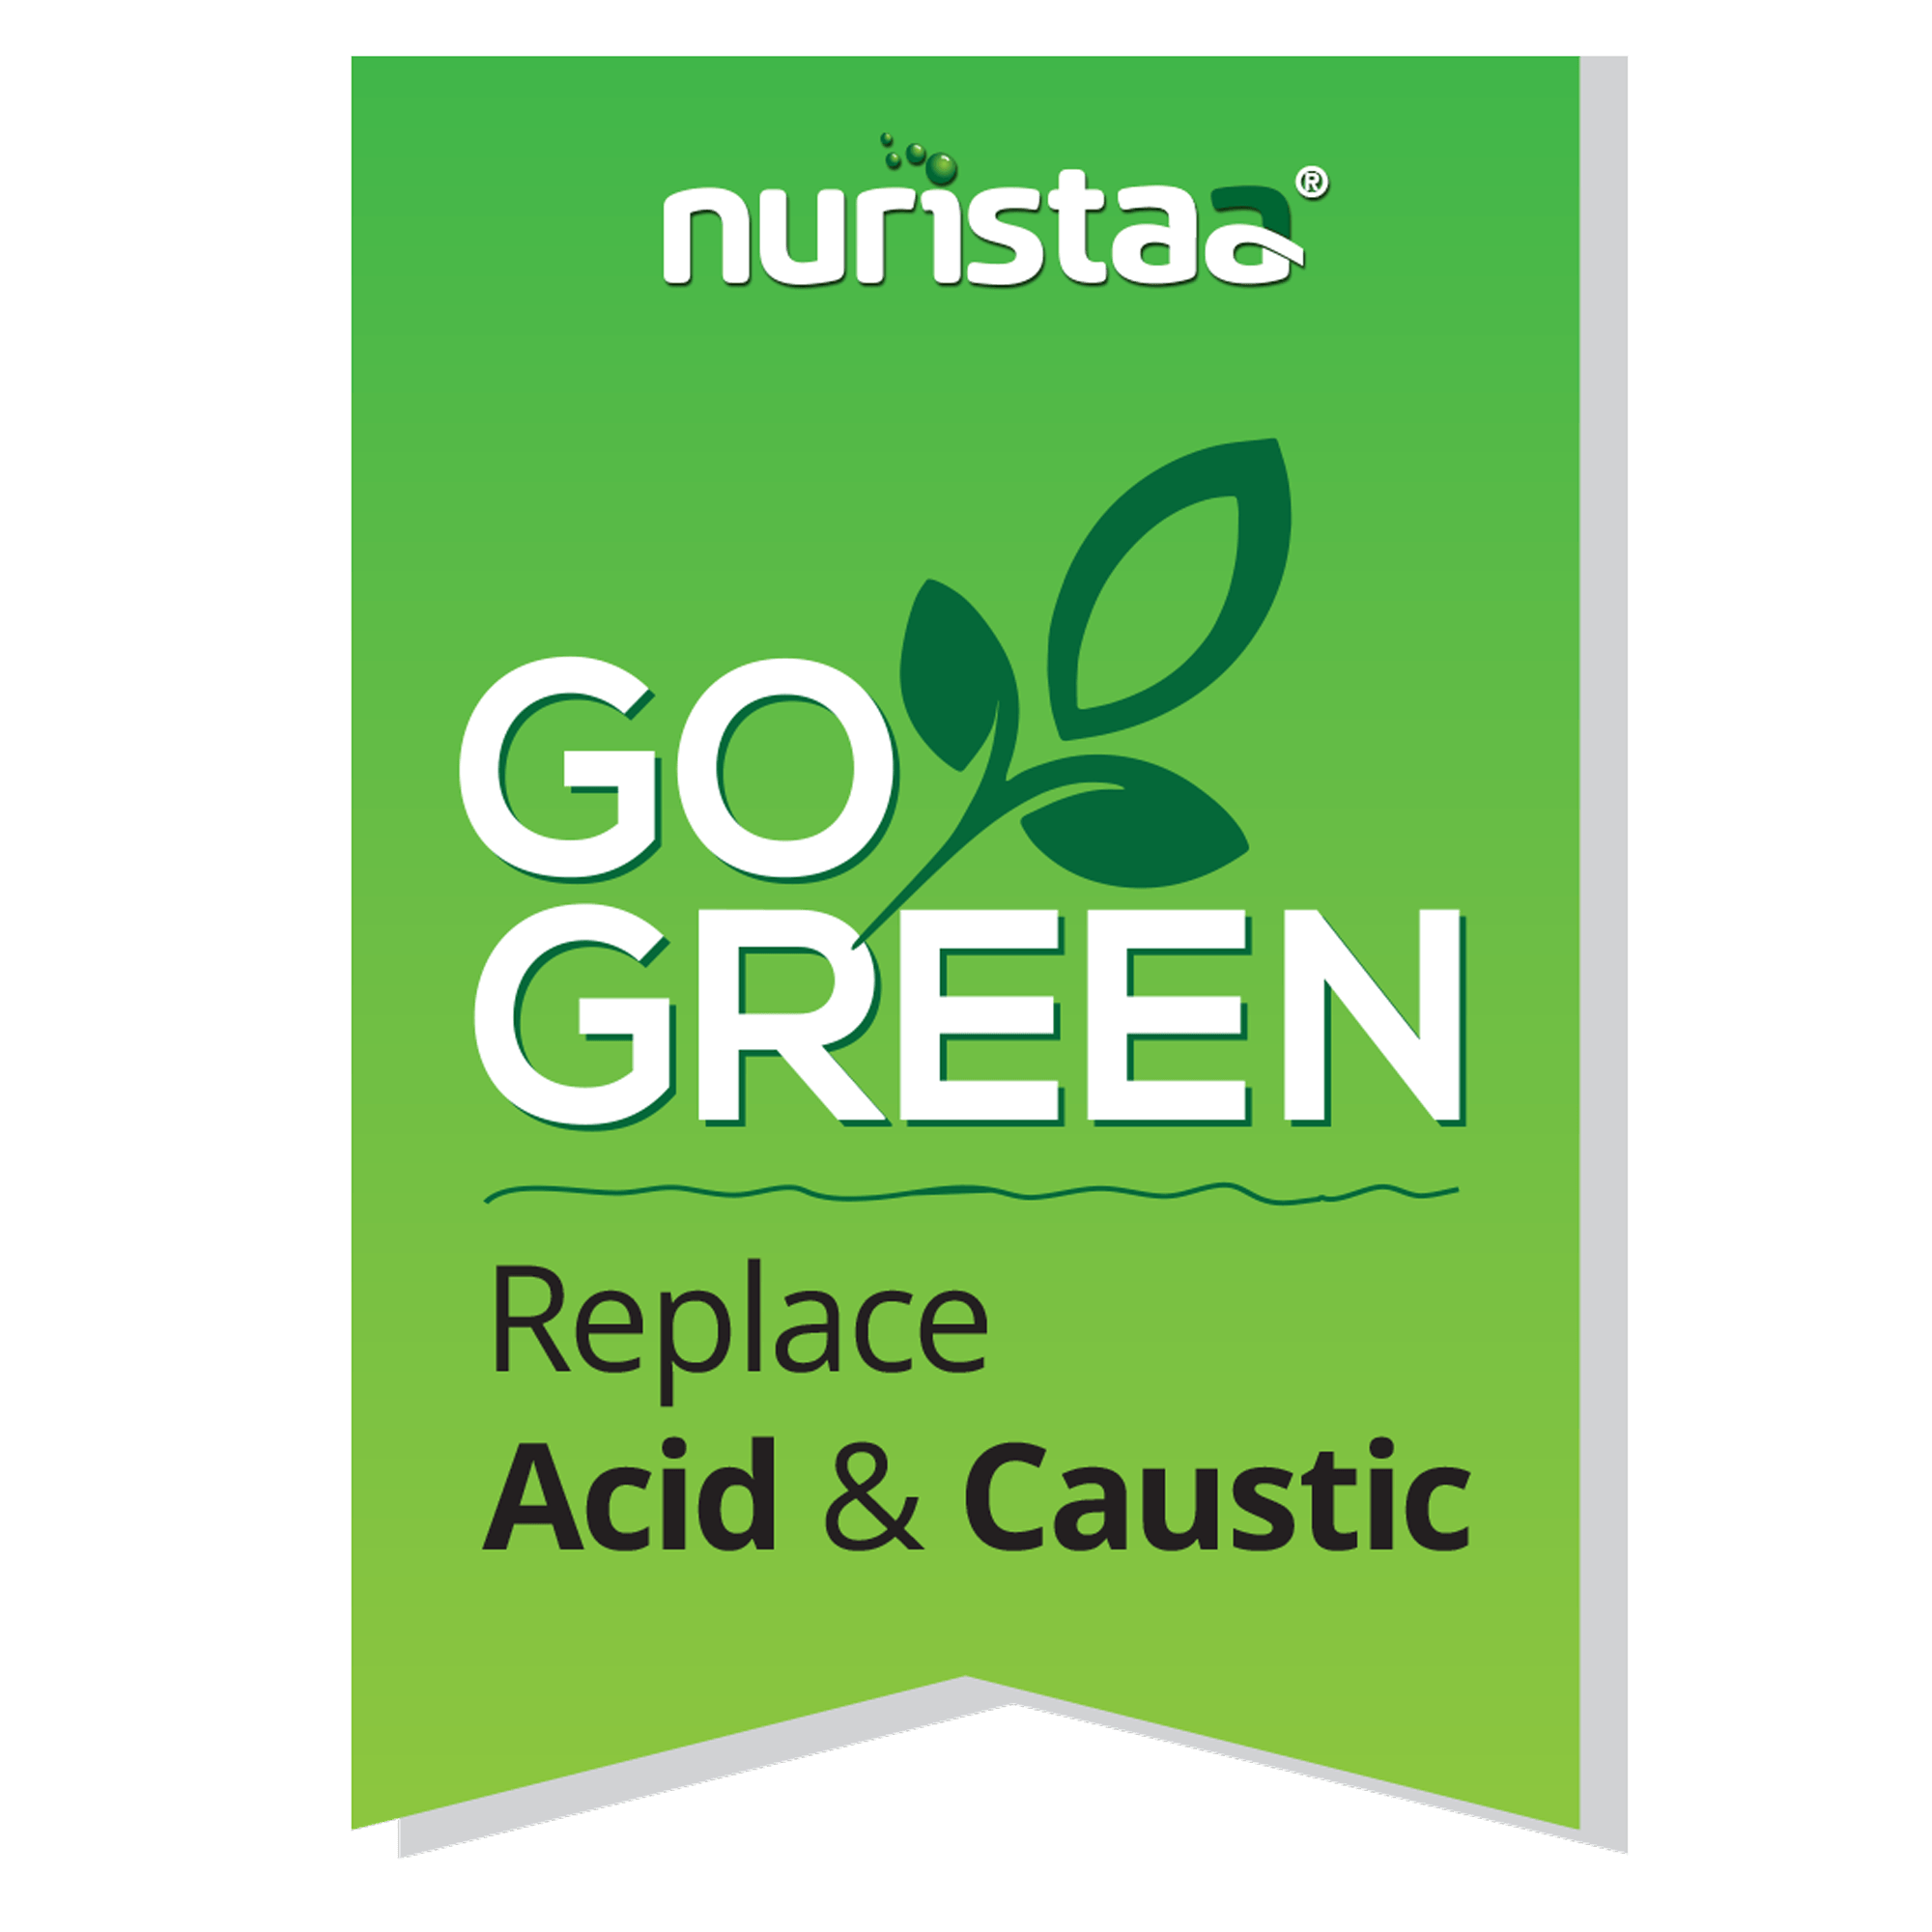 Going Green Chemicals Logo - Nuristaa Pvt Ltd – Eziklean Ultrasonic Machines and Cleaning Chemicals